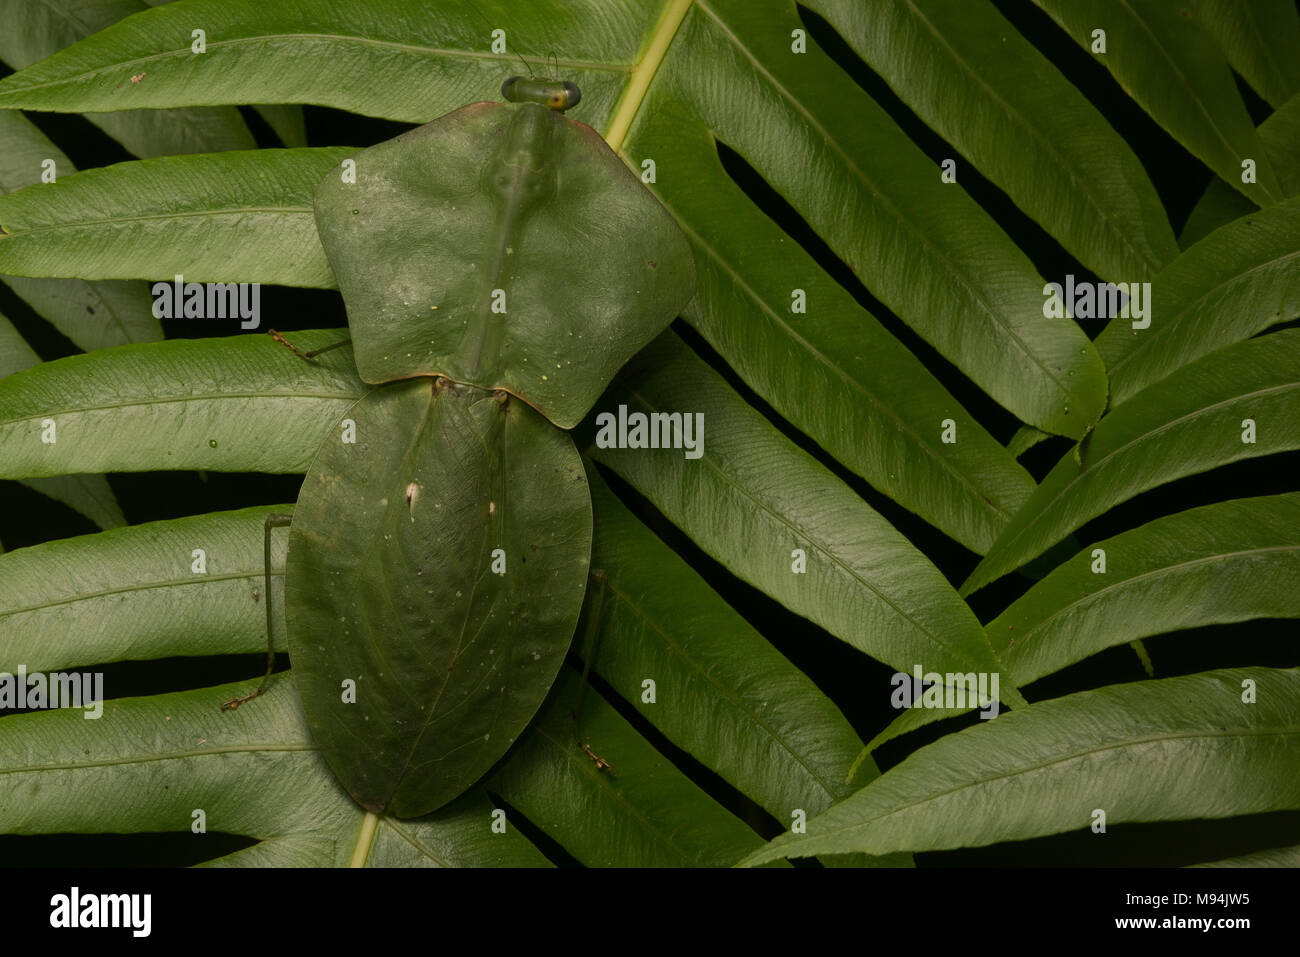 A shield or leaf mantis (Choeradodis species) relies on its amazing camouflage to blend in with plants and stay hidden. Stock Photo